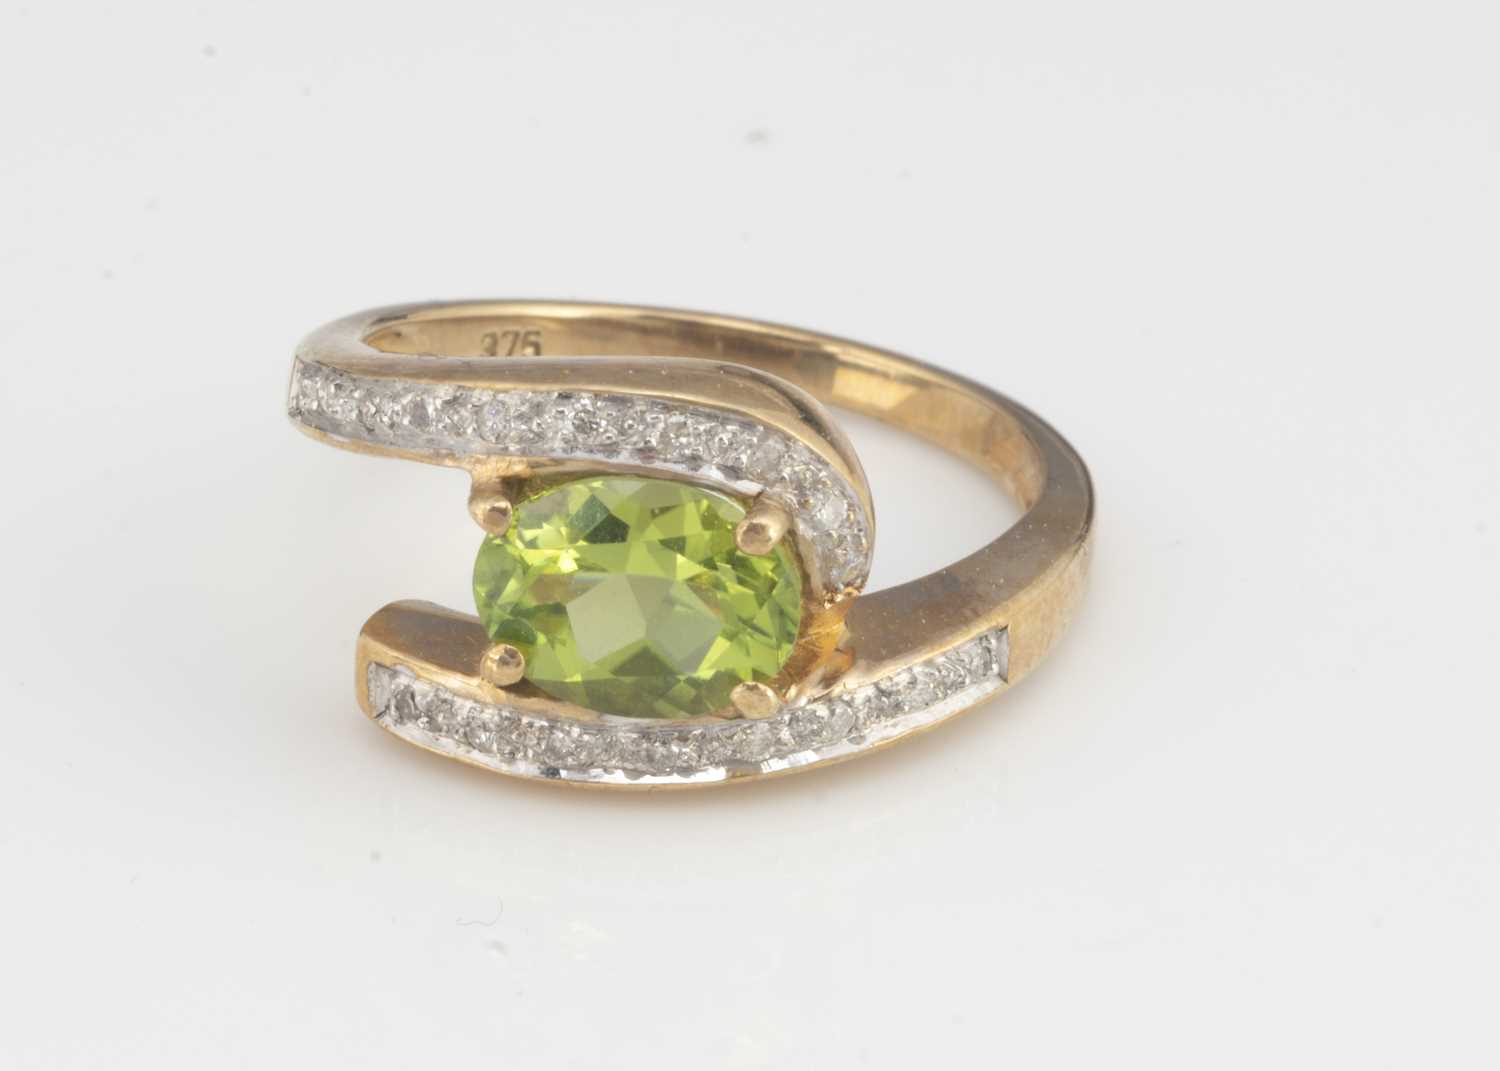 Lot 32 - A modern 9ct gold and gem set ring